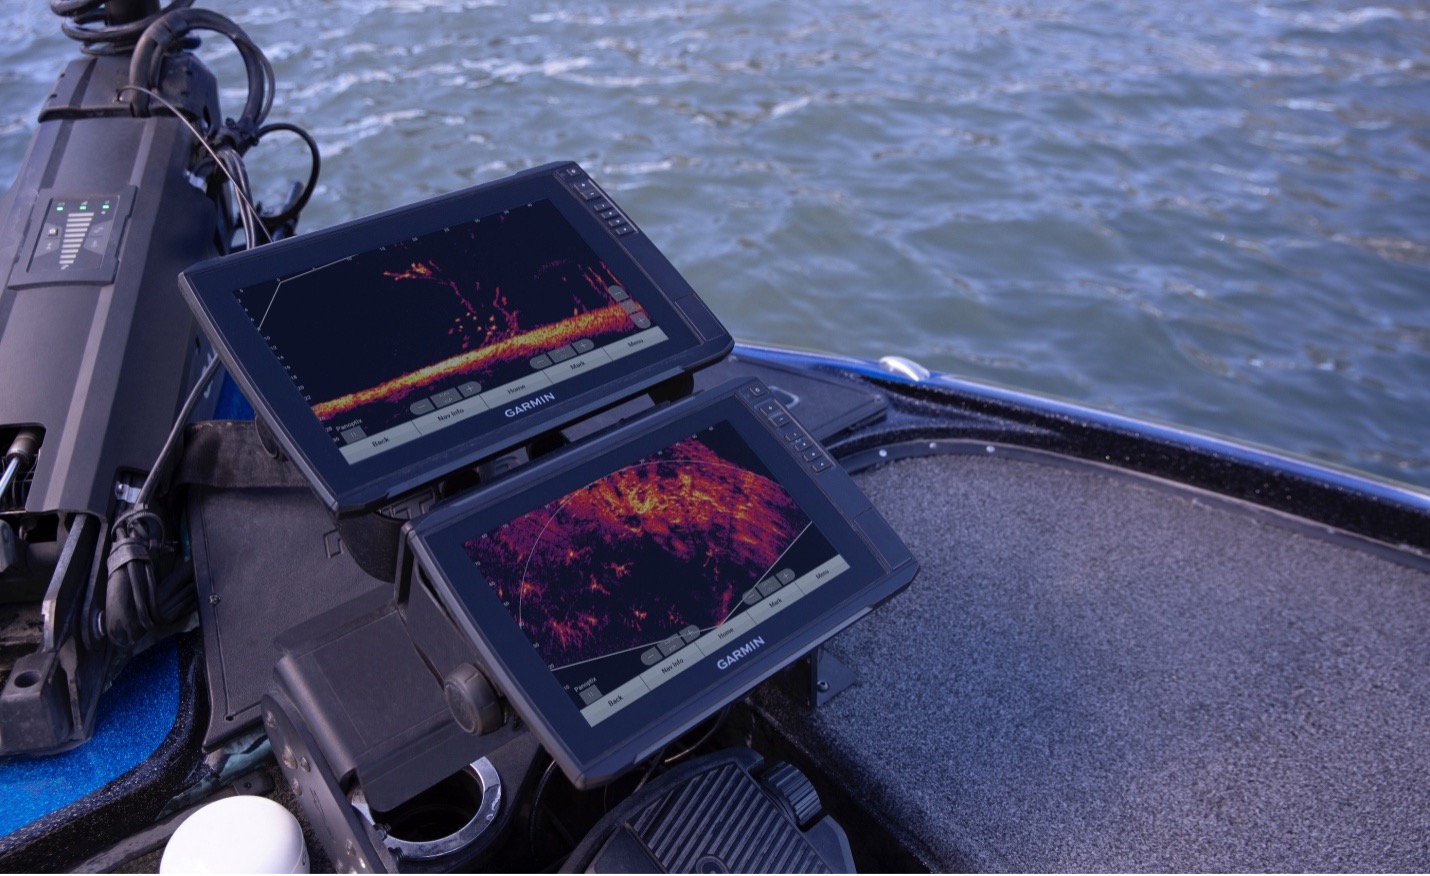 Livescope, active target, and Mega. - The Hull Truth - Boating and